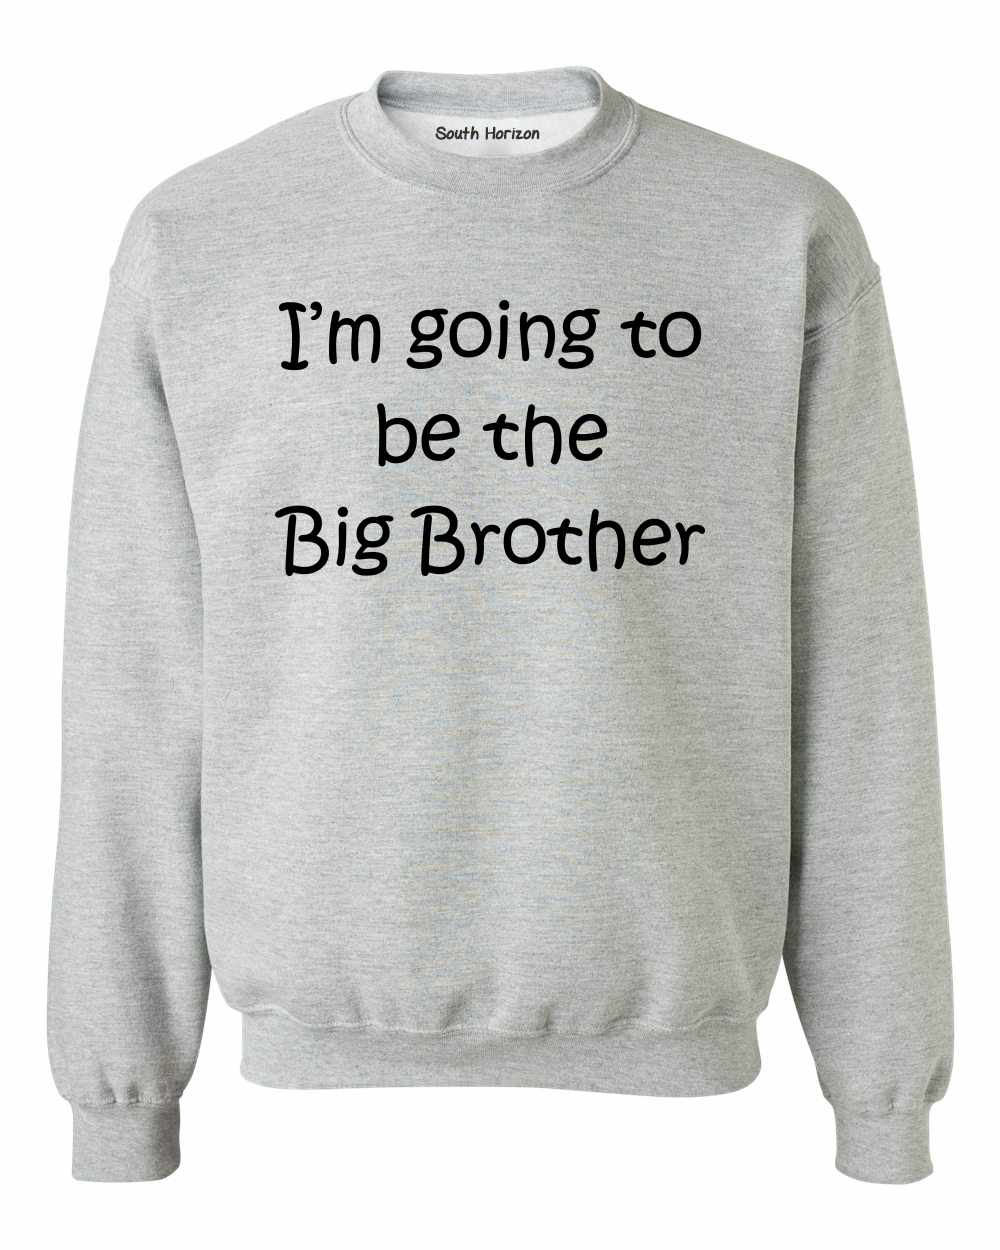 I'M GOING TO BE THE BIG BROTHER on SweatShirt